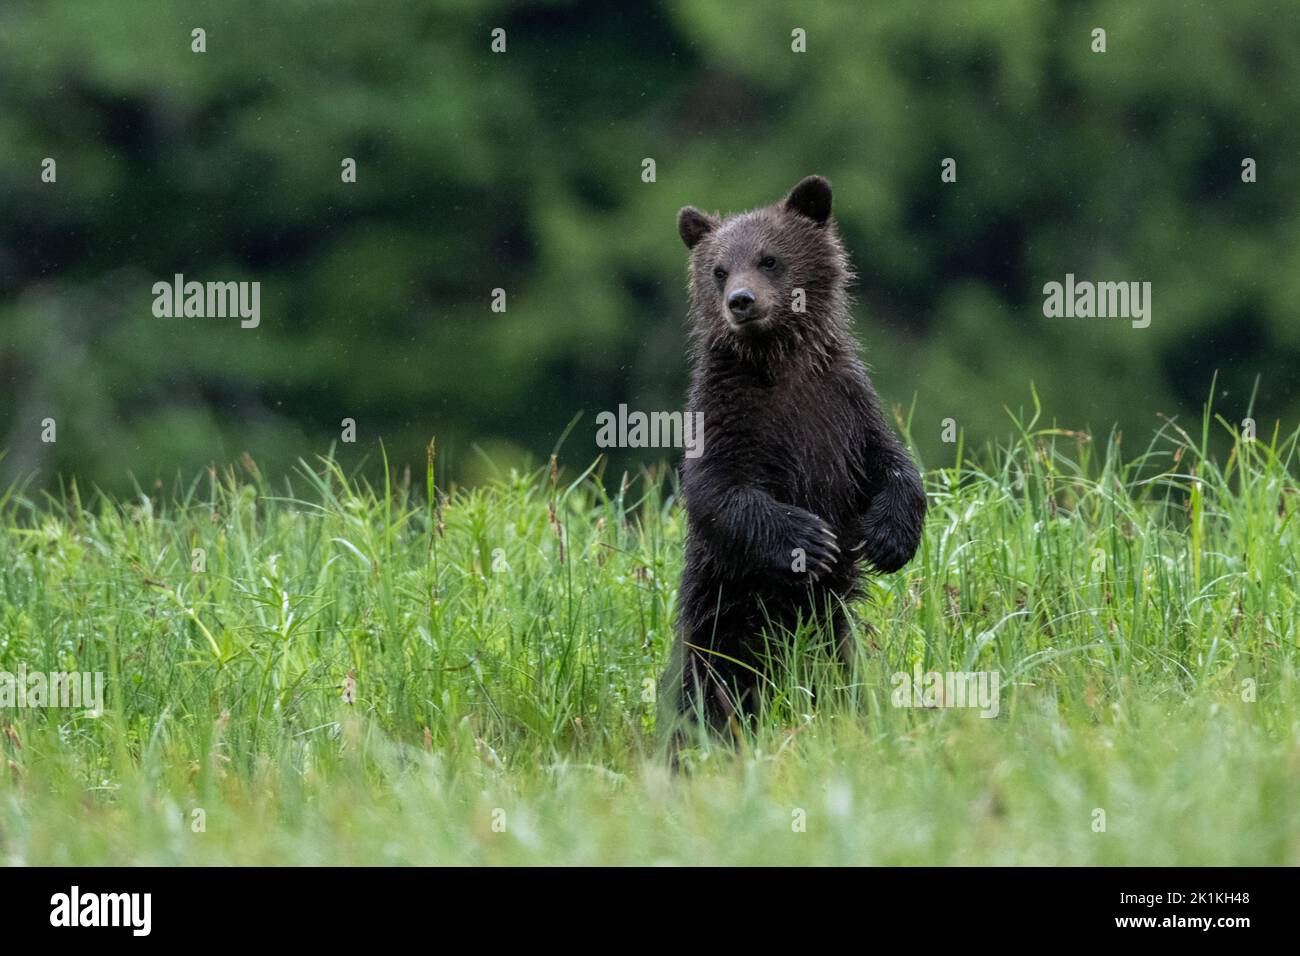 A cute black grizzly bear cub stands in tall sedge grasses in the Great Bear Rainforest, Canada Stock Photo